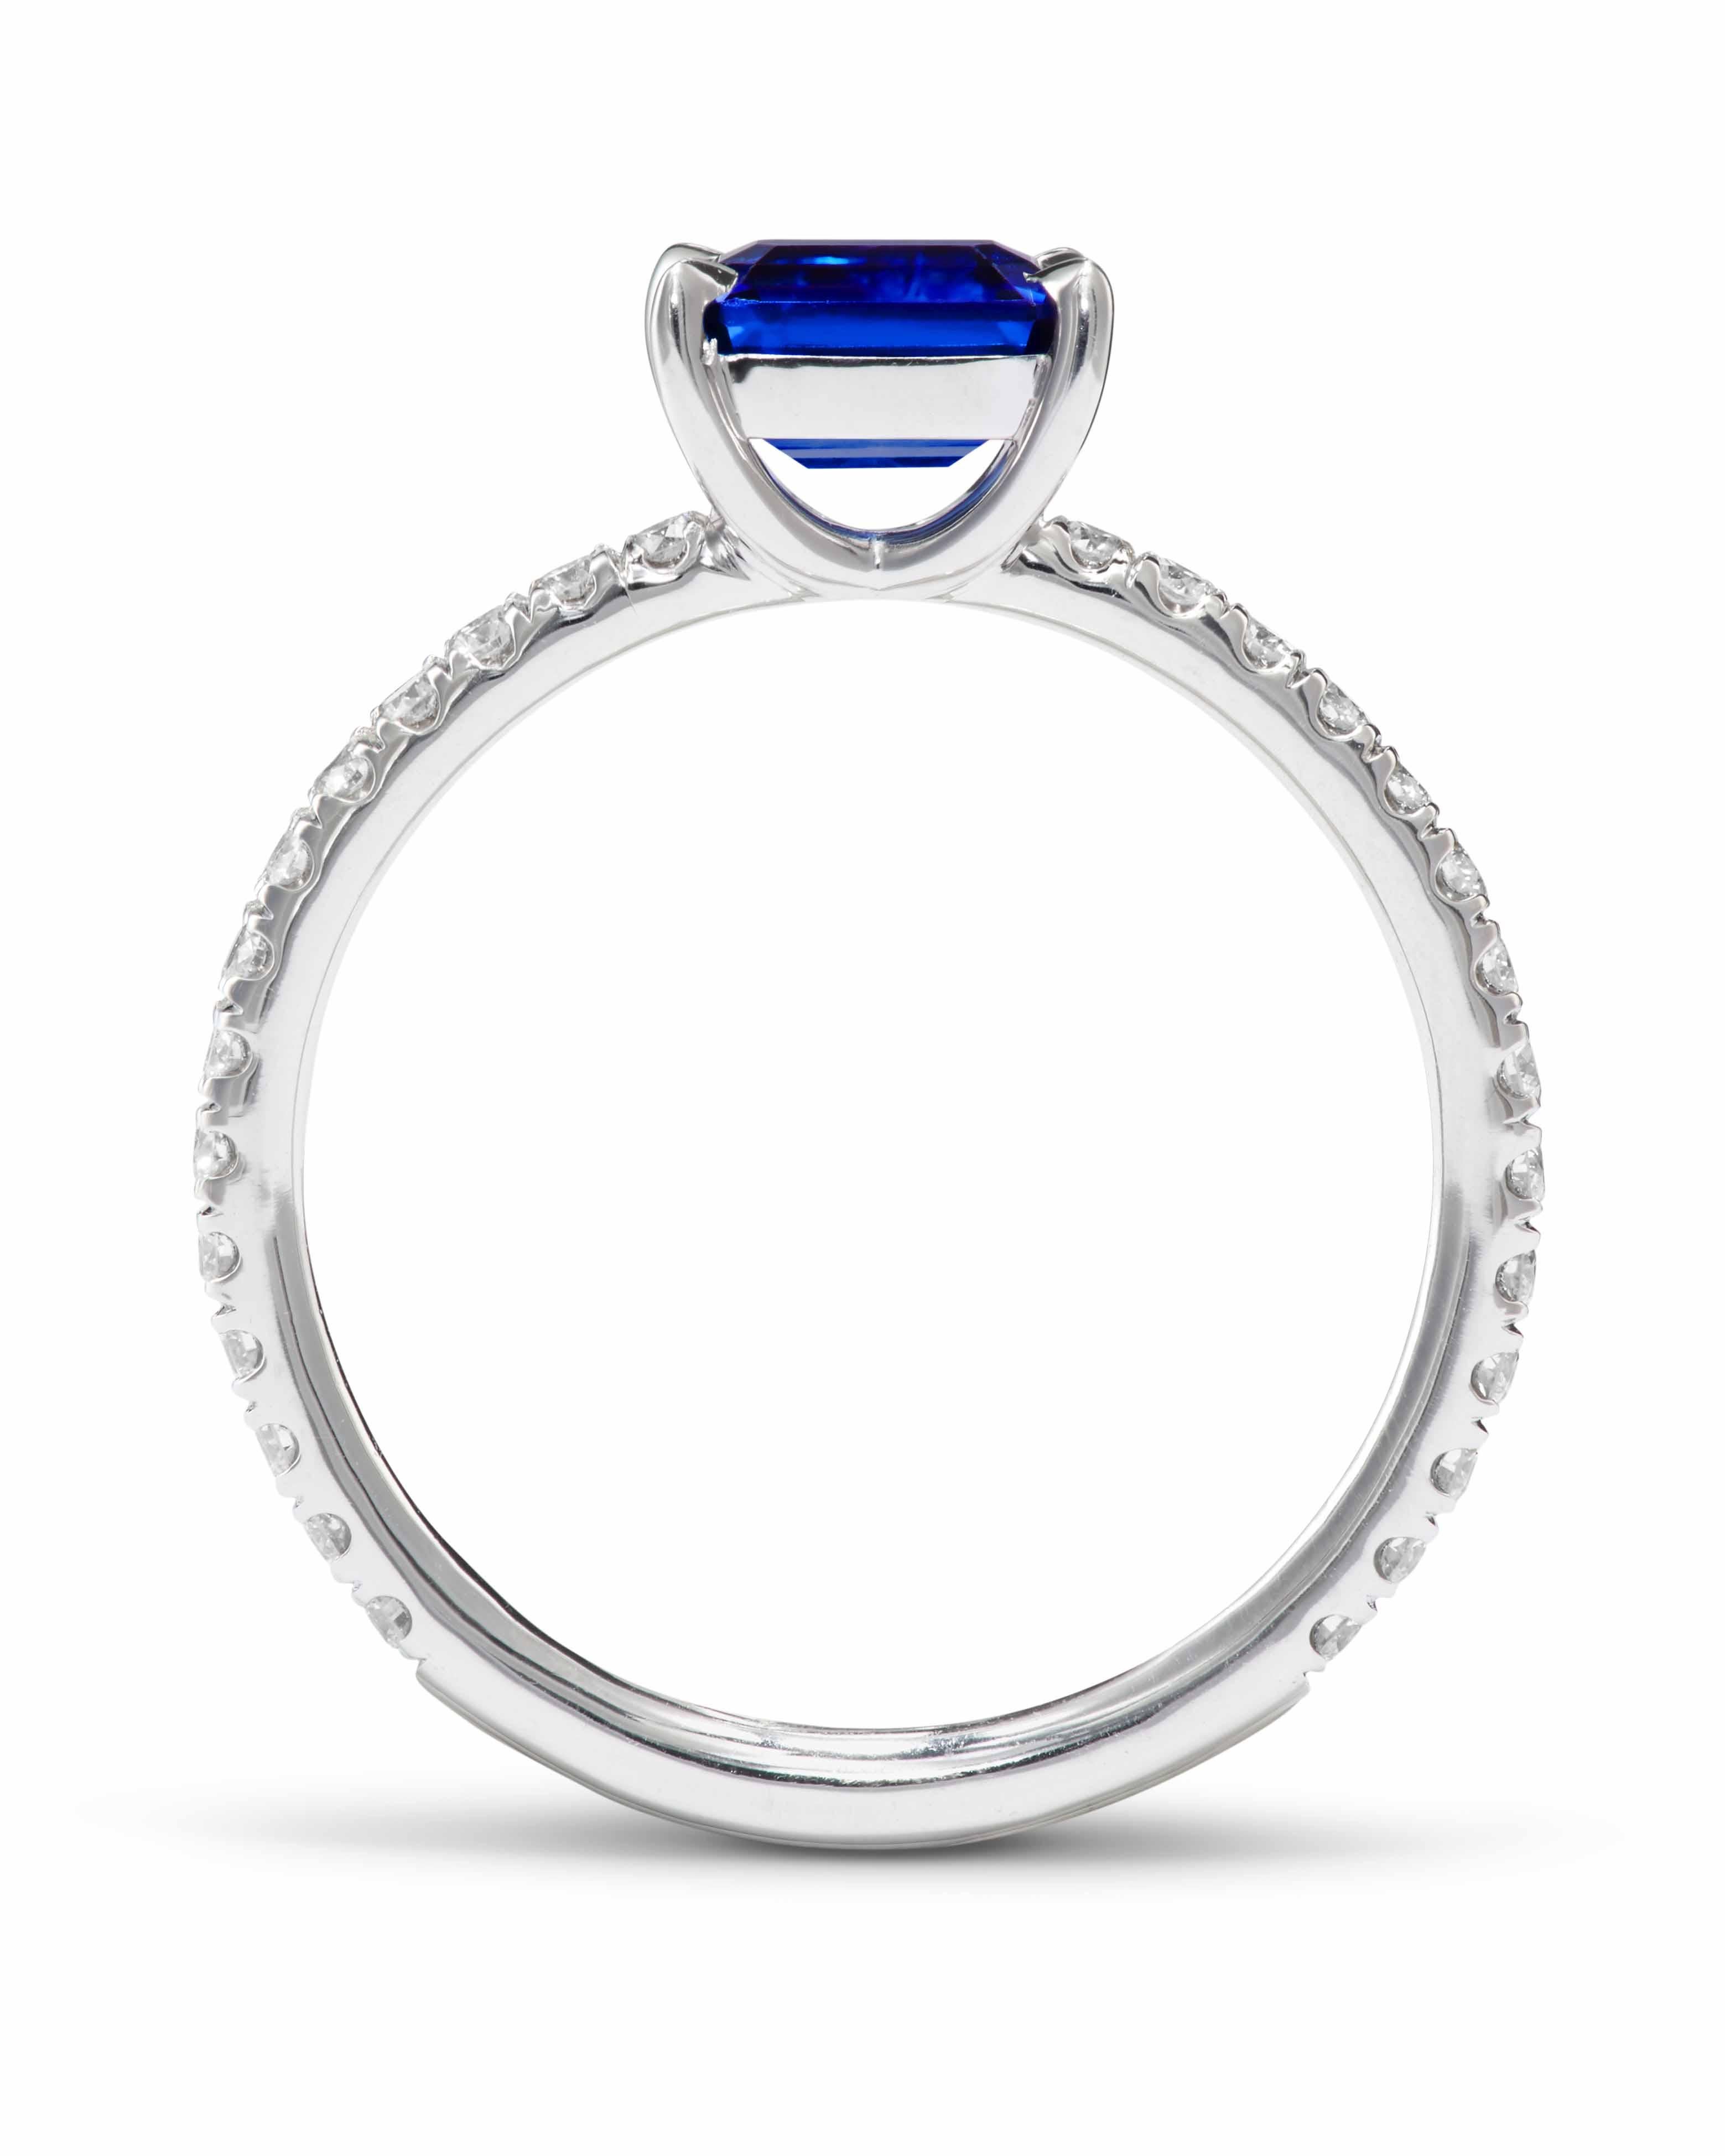 The ring is crafted in 18K white gold and is 2/3 pave-set with 0.32 ct. F/VS brilliant-cut diamonds (ct. weight based on size 6.5). The center stone is a 1.1 ct. vivid blue Sapphire from Sri Lanka.
The width of the band is 1.6 mm. 

Available in